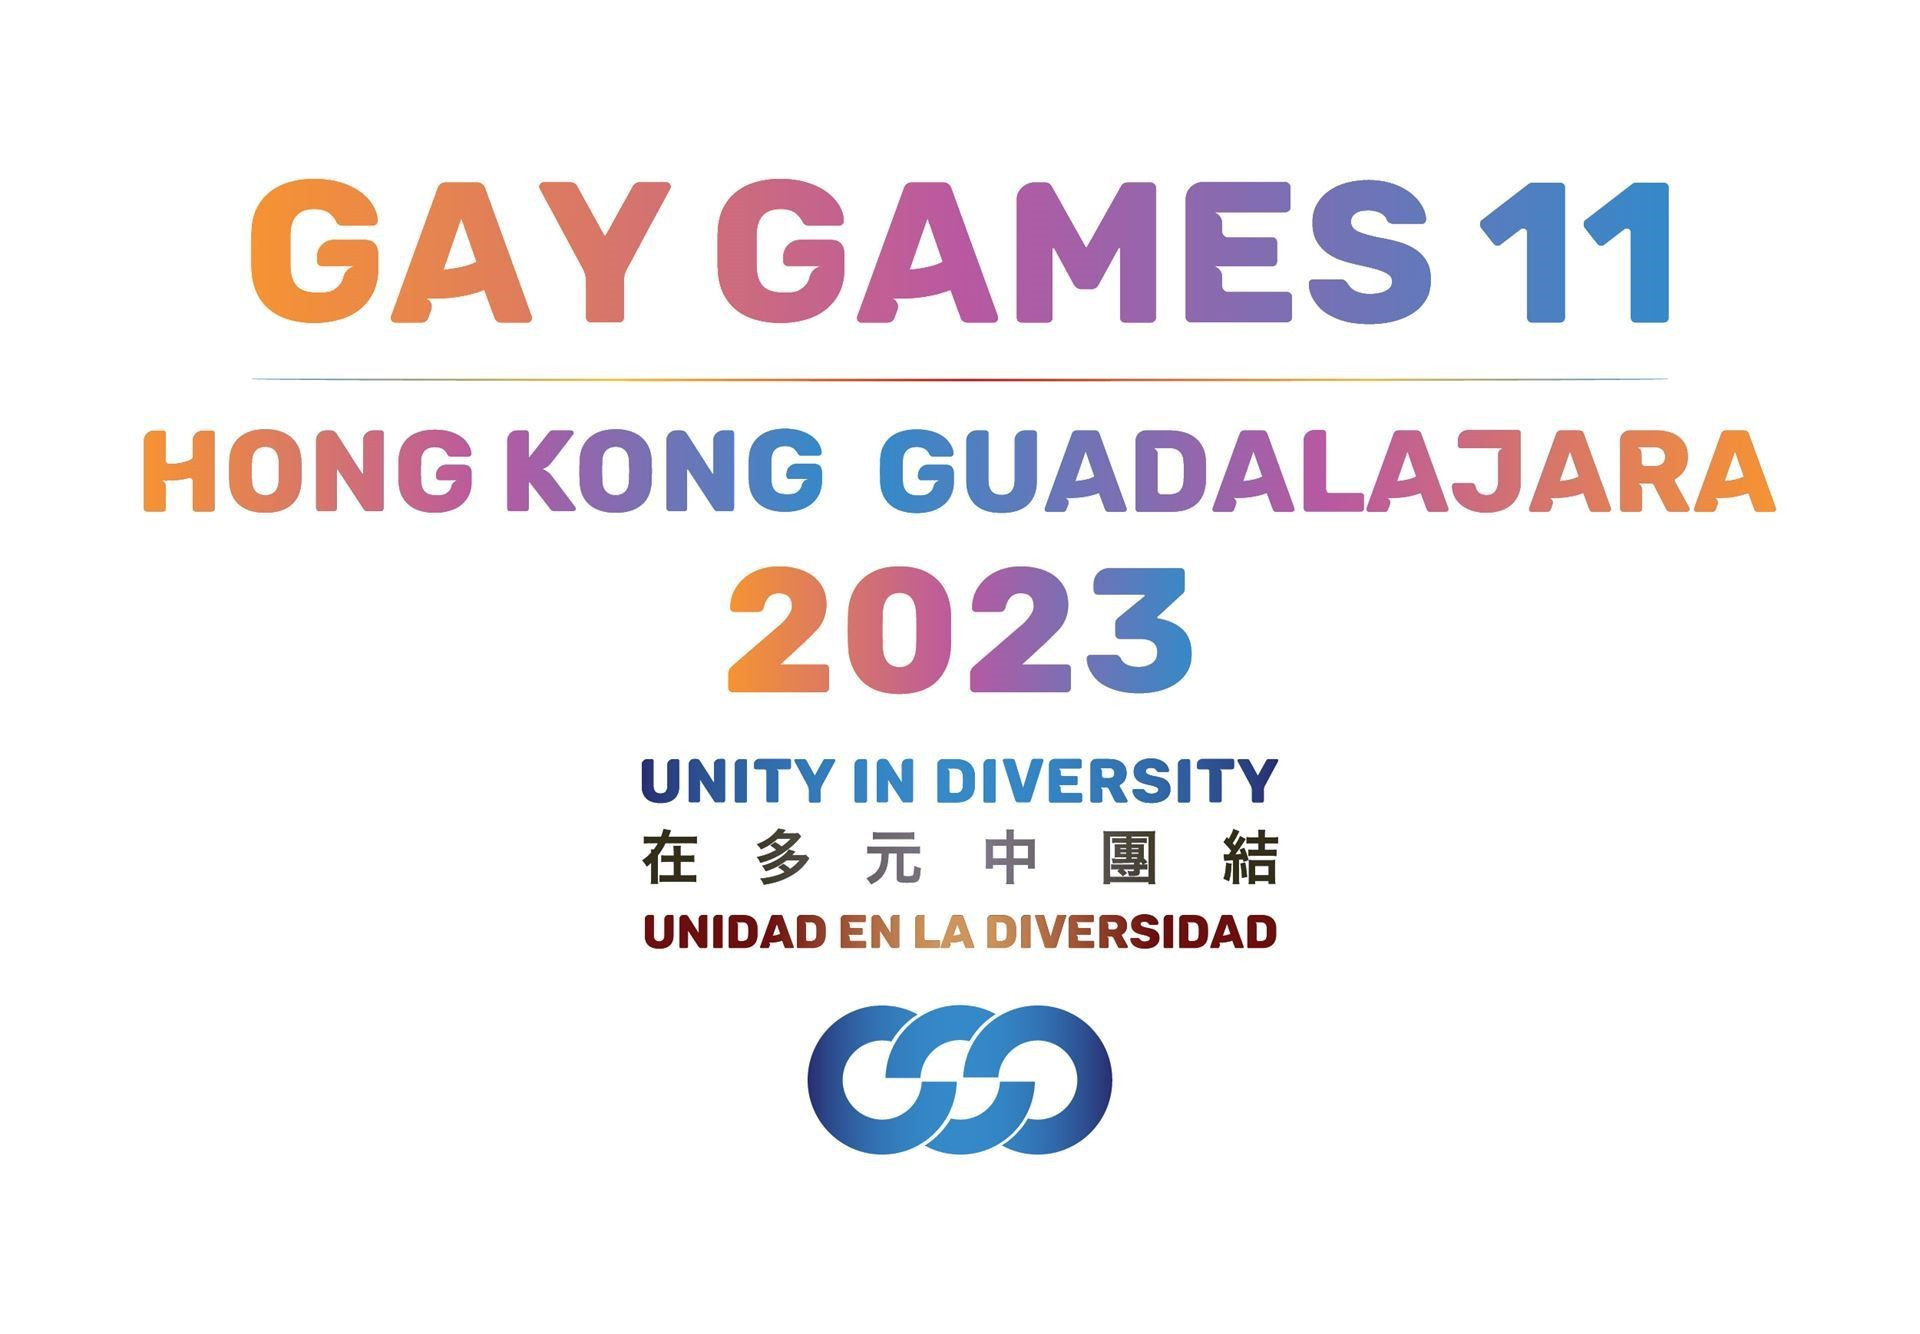 The 11th Gay Games are due to run from November 3 to 11 2023 ©Federation of Gay Games